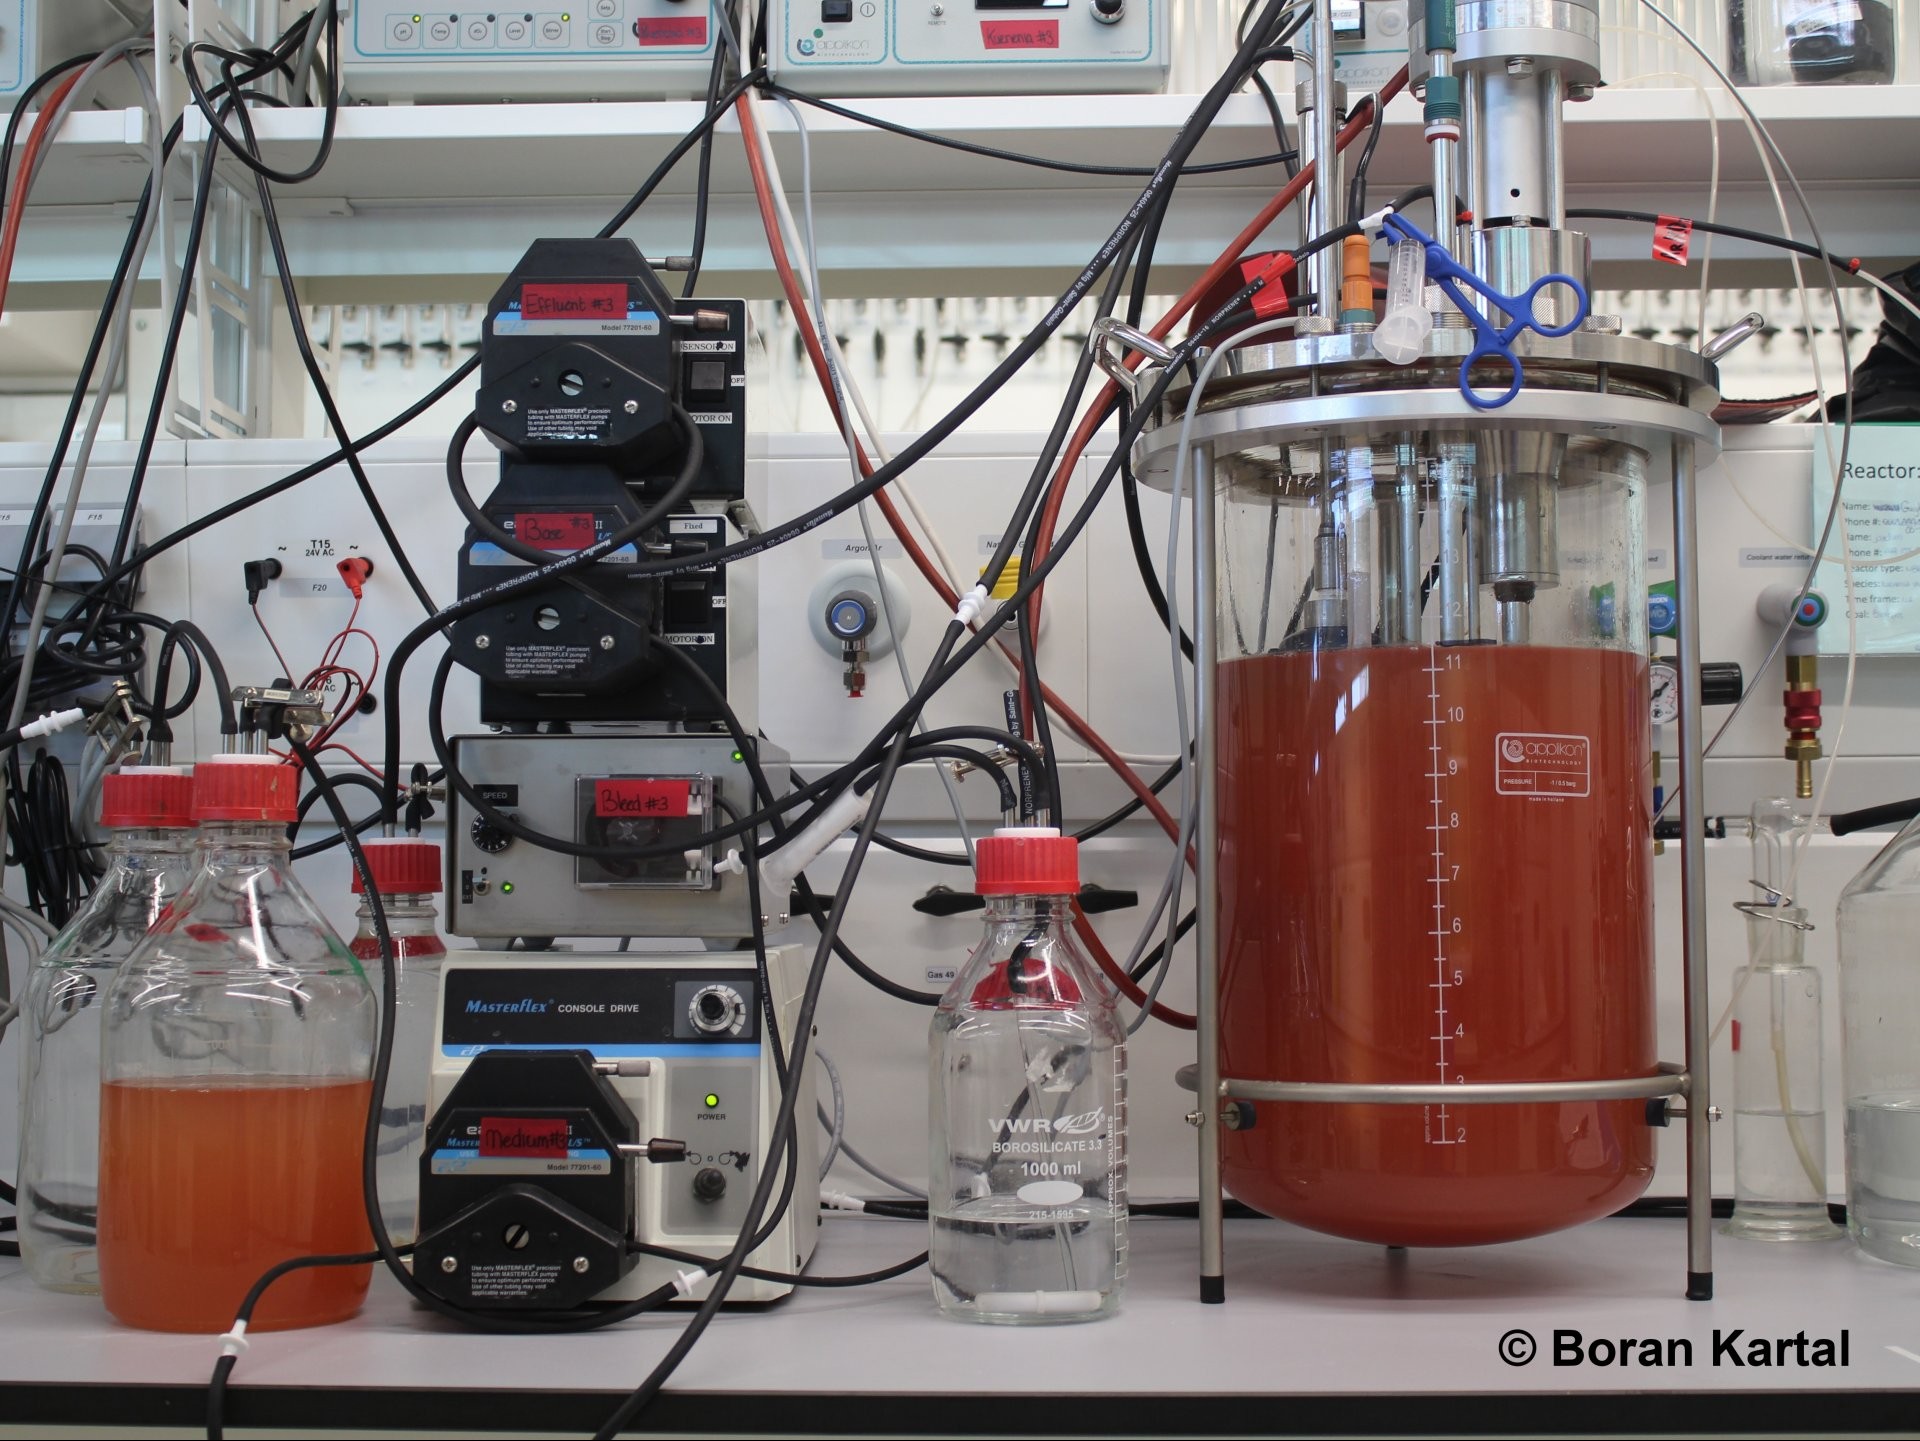 One of the bioreactors that Kartal and his colleagues used to grow cells of K. stuttgartiensis in the lab. The bright red color is due to the presence of iron-containing cytochrome c proteins in the cells. Anammox bacteria are packed with cytochrome c type proteins, including the enzymes that perform the key reactions of the anammox process, making the cells remarkably red. © Boran Kartal